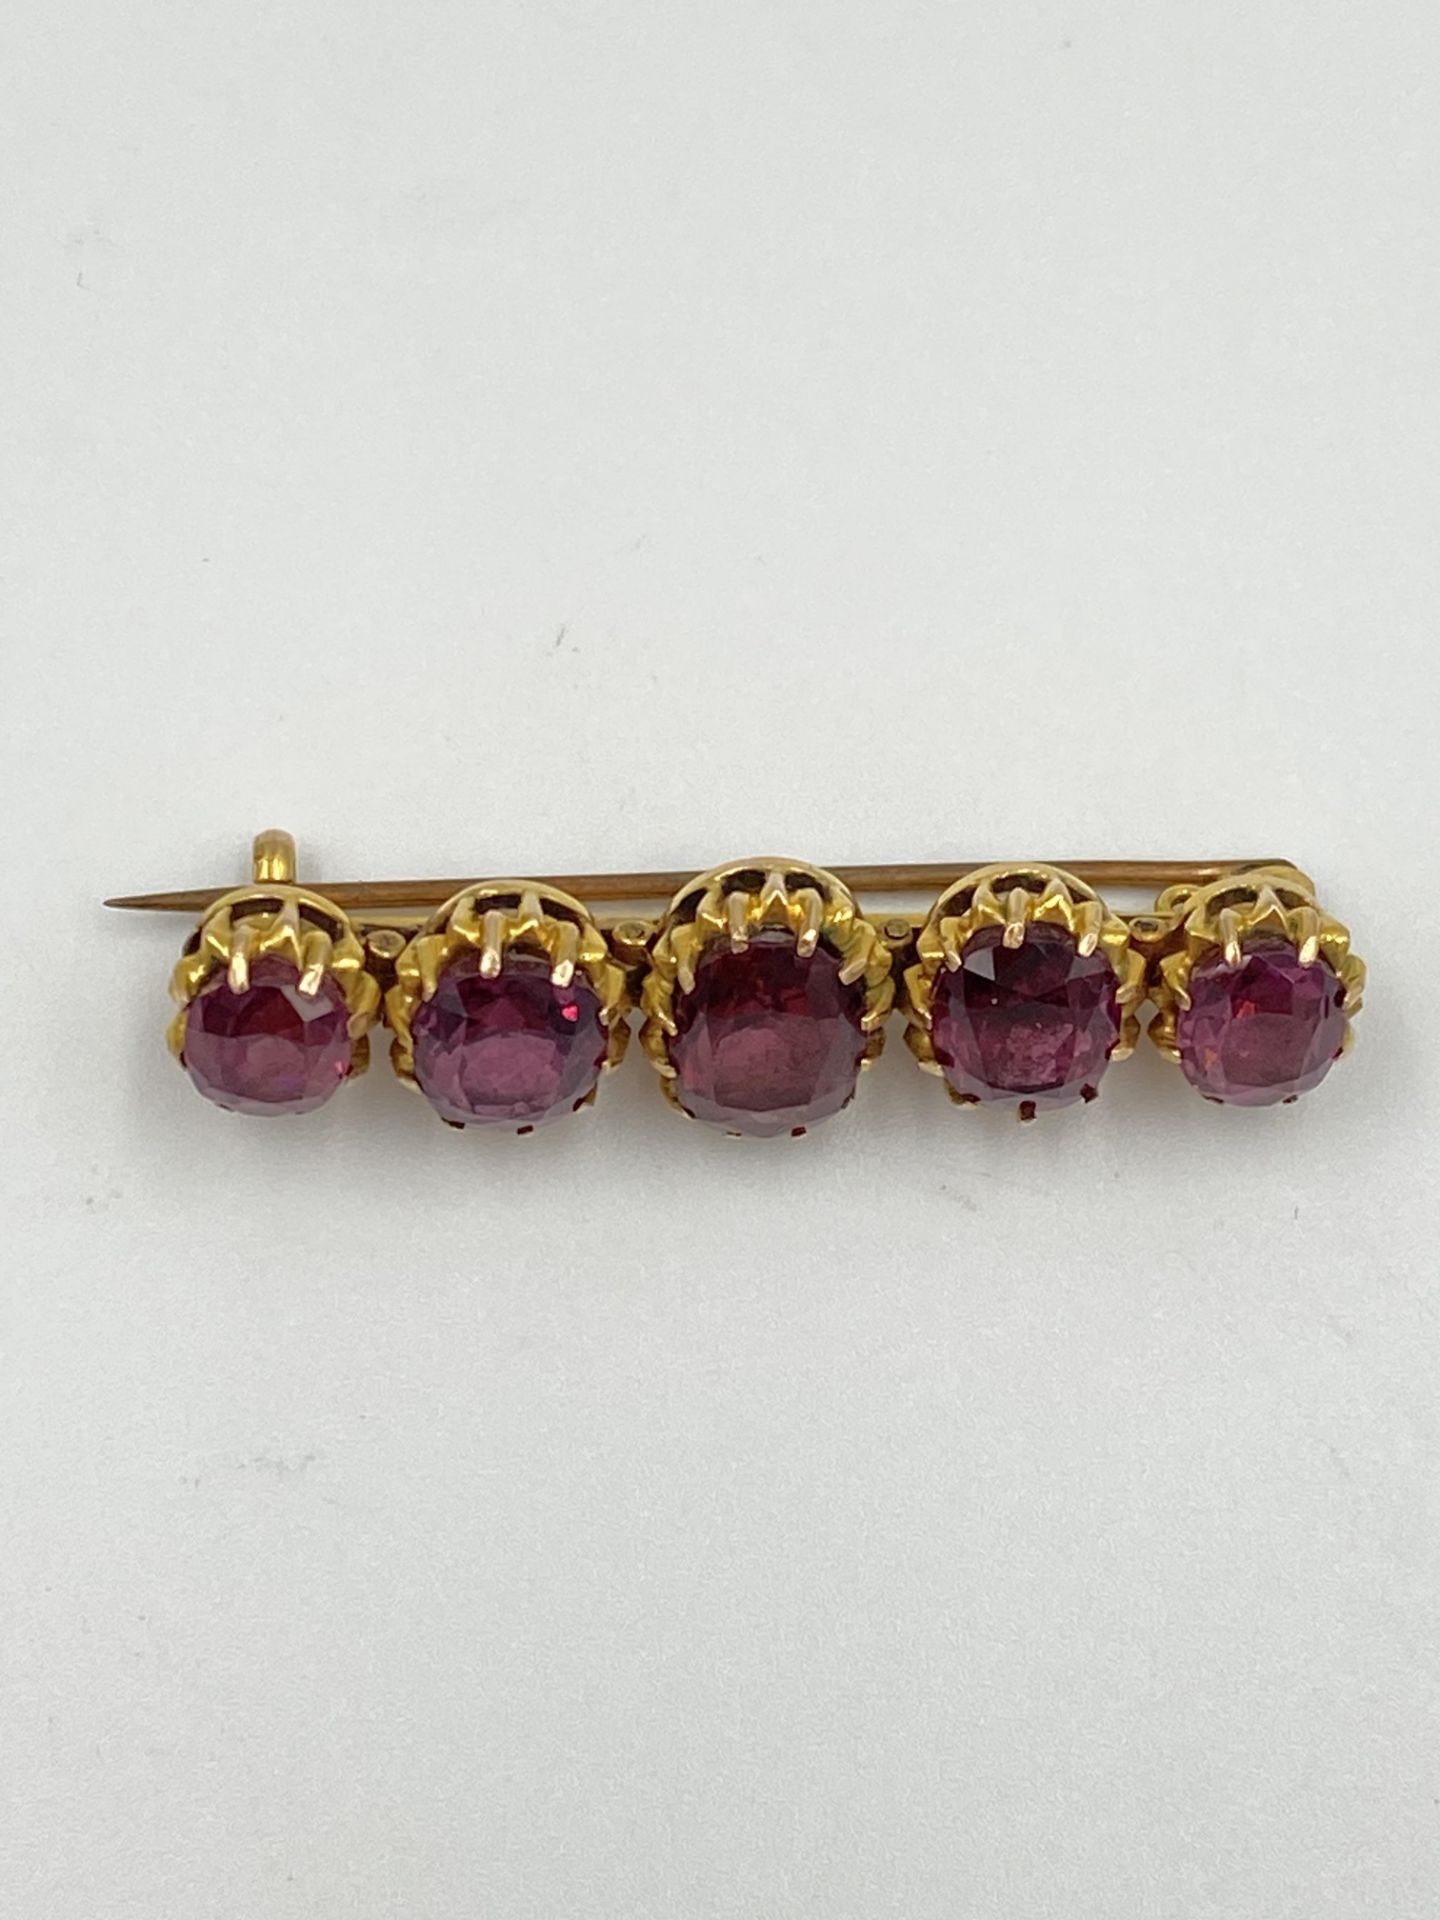 9ct gold and tourmaline brooch - Image 2 of 6